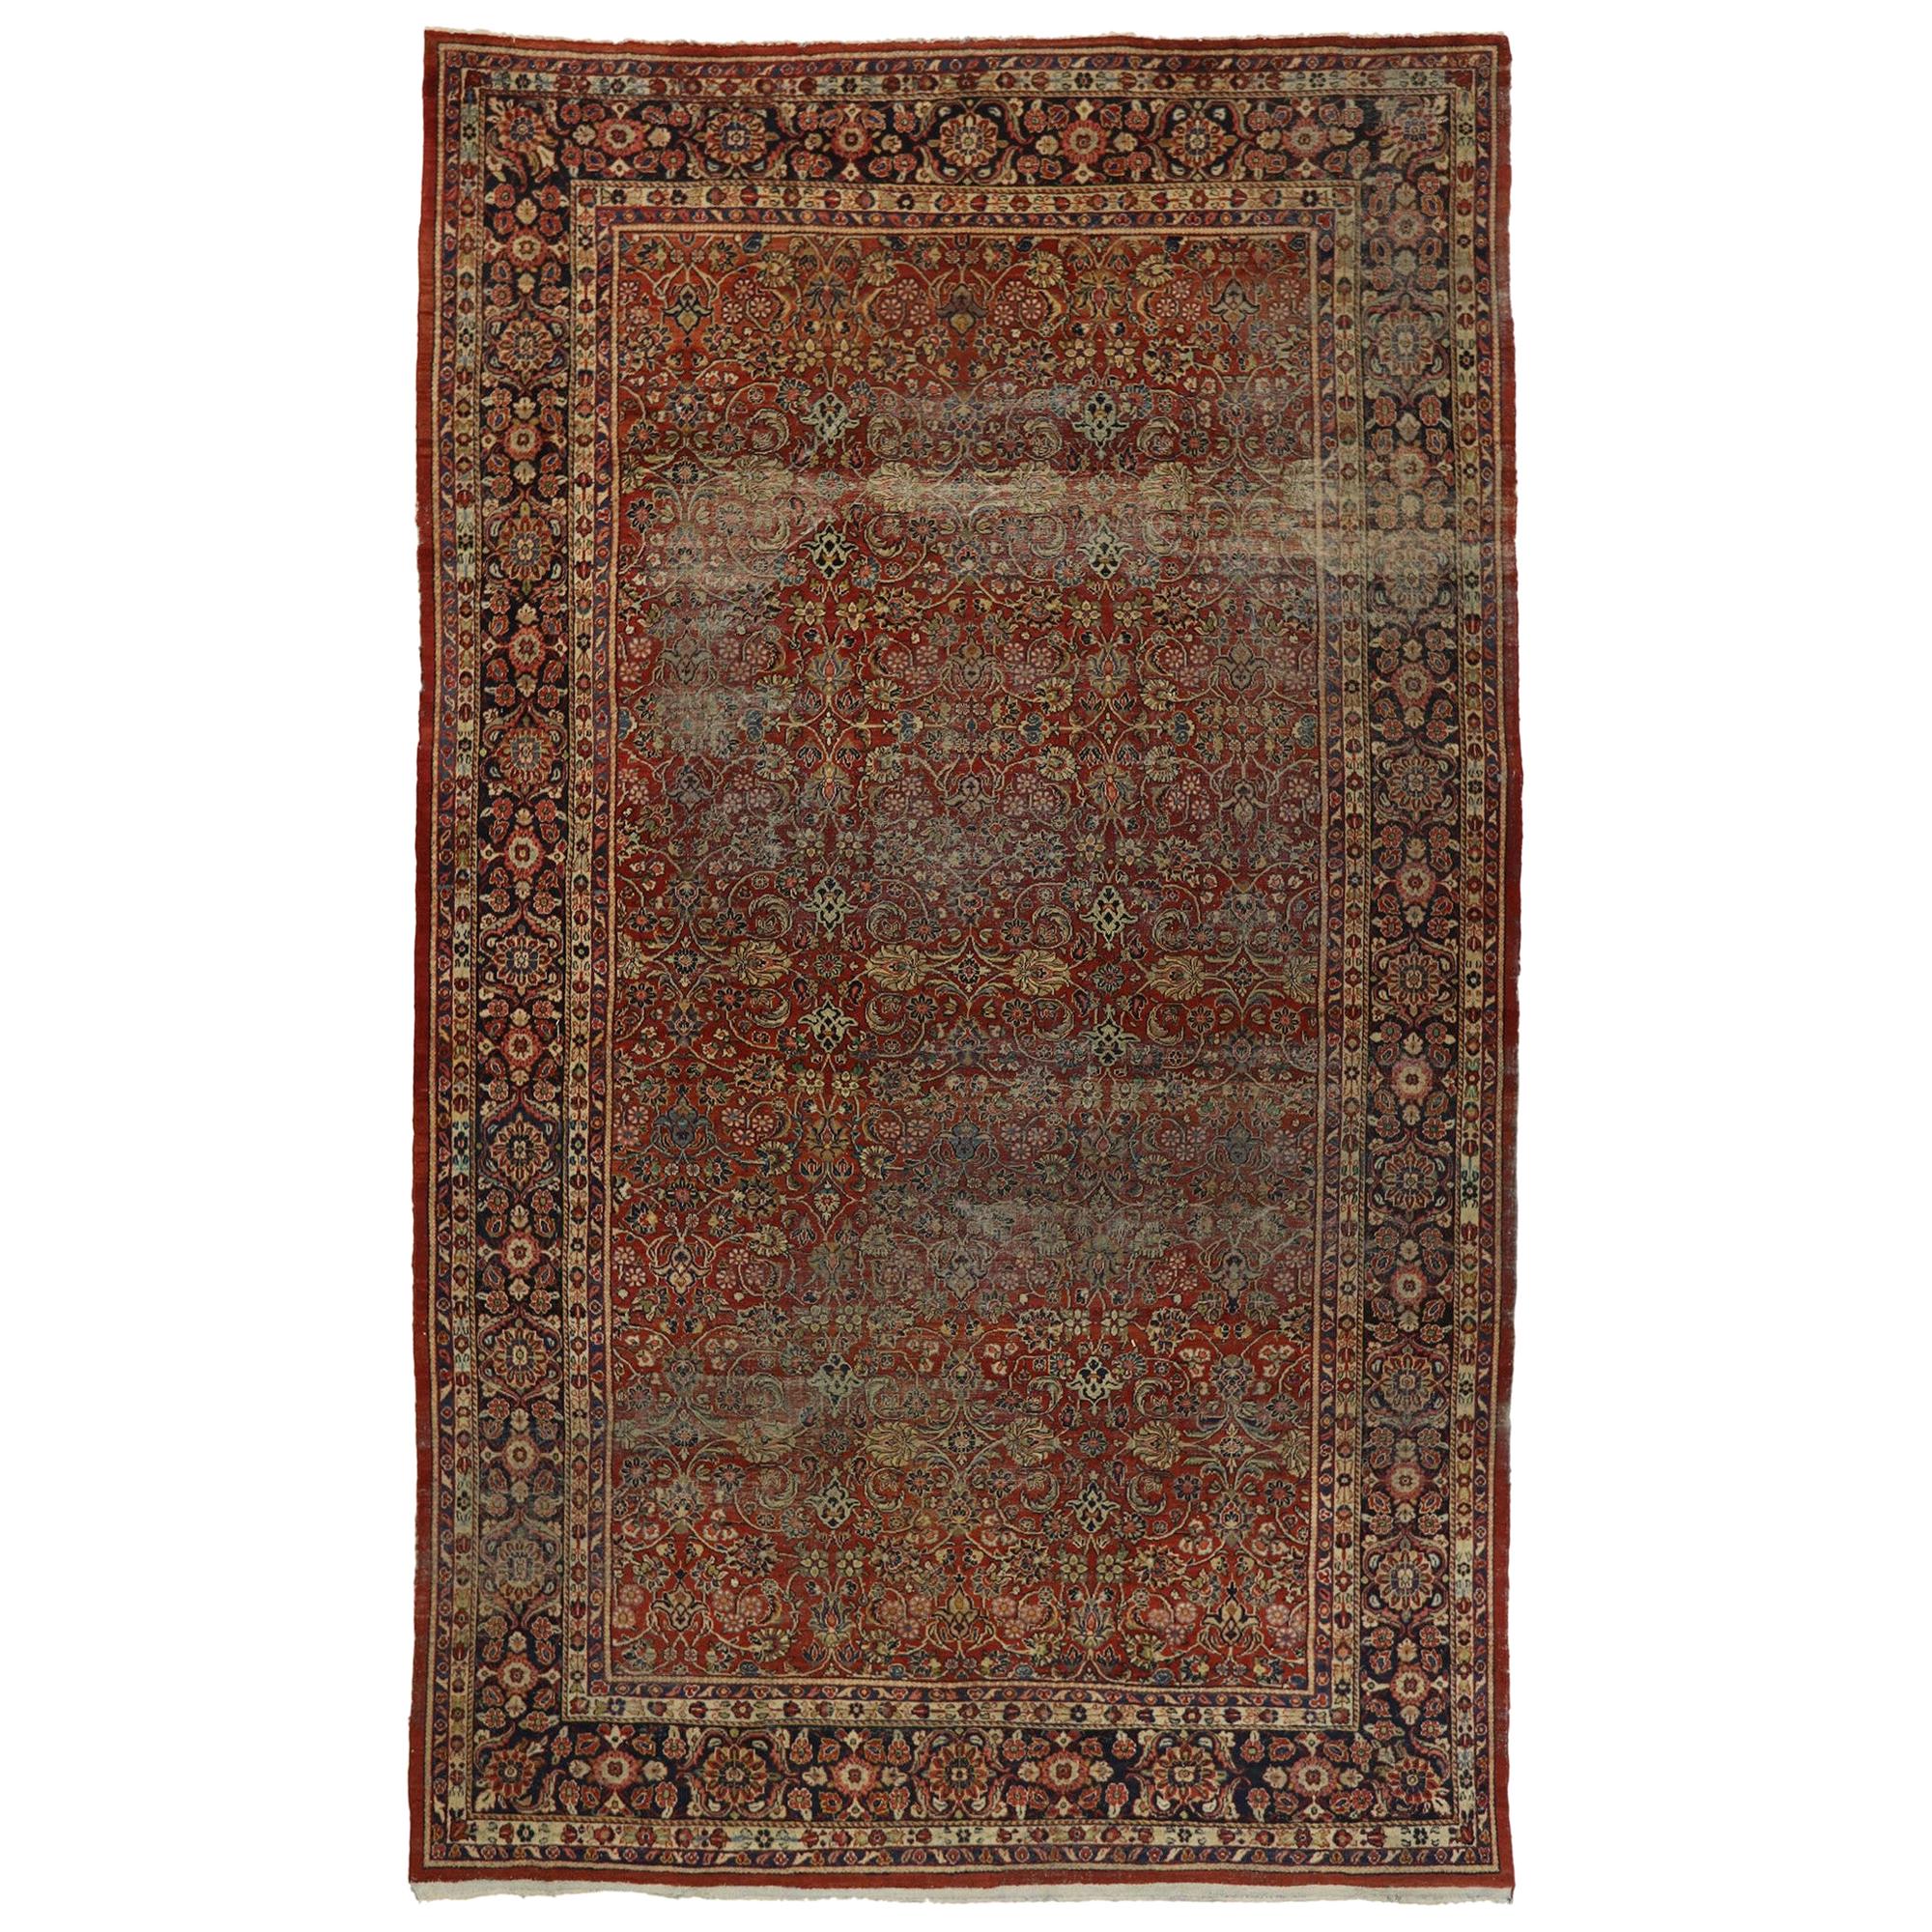 Distressed Antique Persian Mahal Rug with Modern Rustic English Style